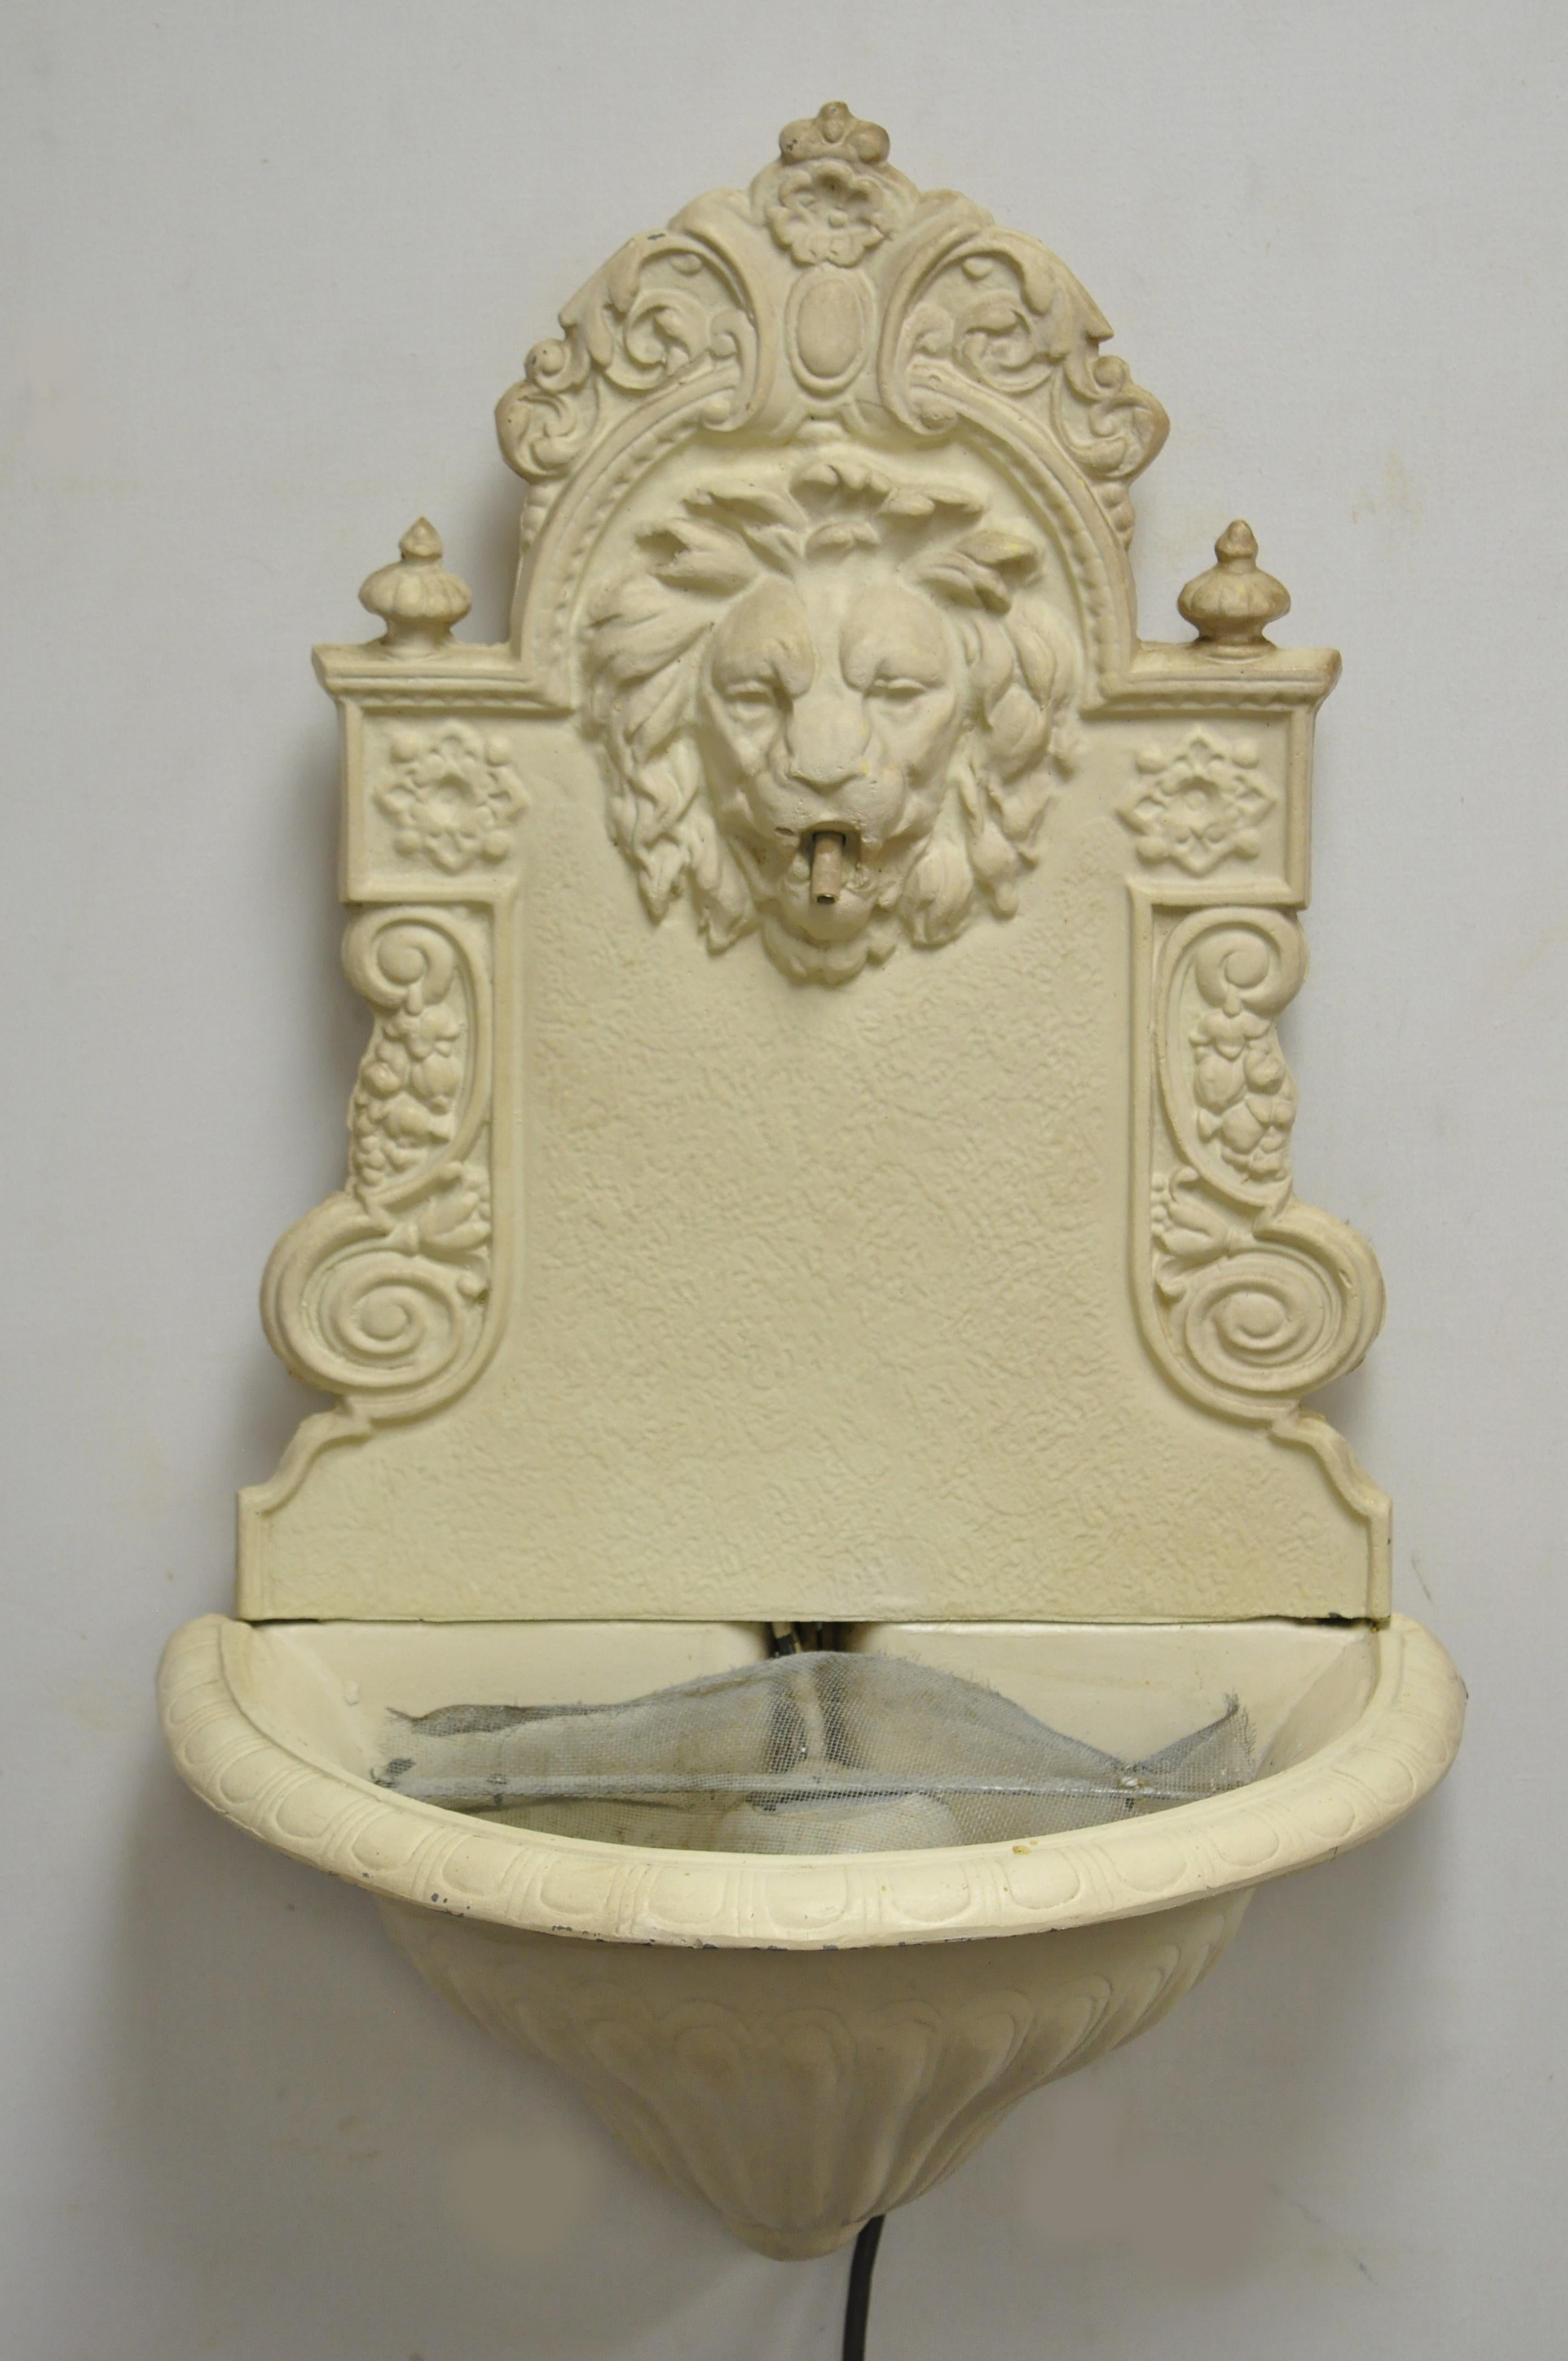 North American Vintage French Empire Lion Tiger Cast Iron Garden Water Fountain with Pump